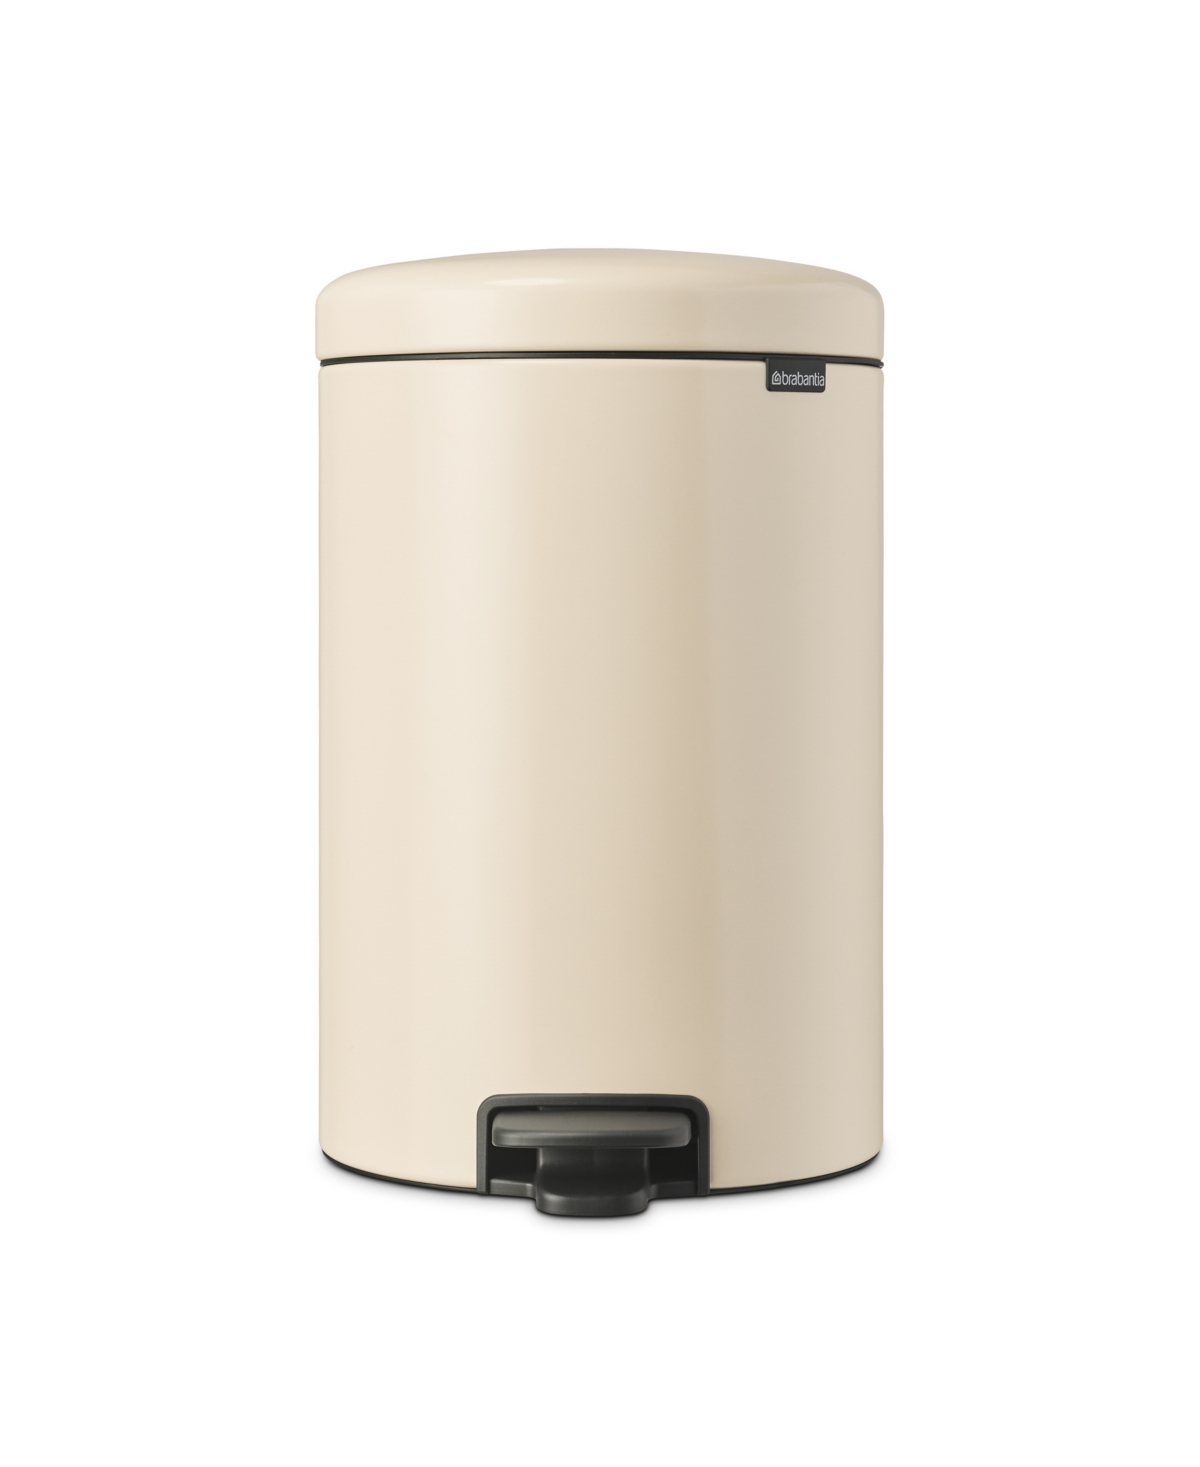 Brabantia New Icon Step On Trash Can, 5.3 Gallon, 20 Liter In Soft Beige